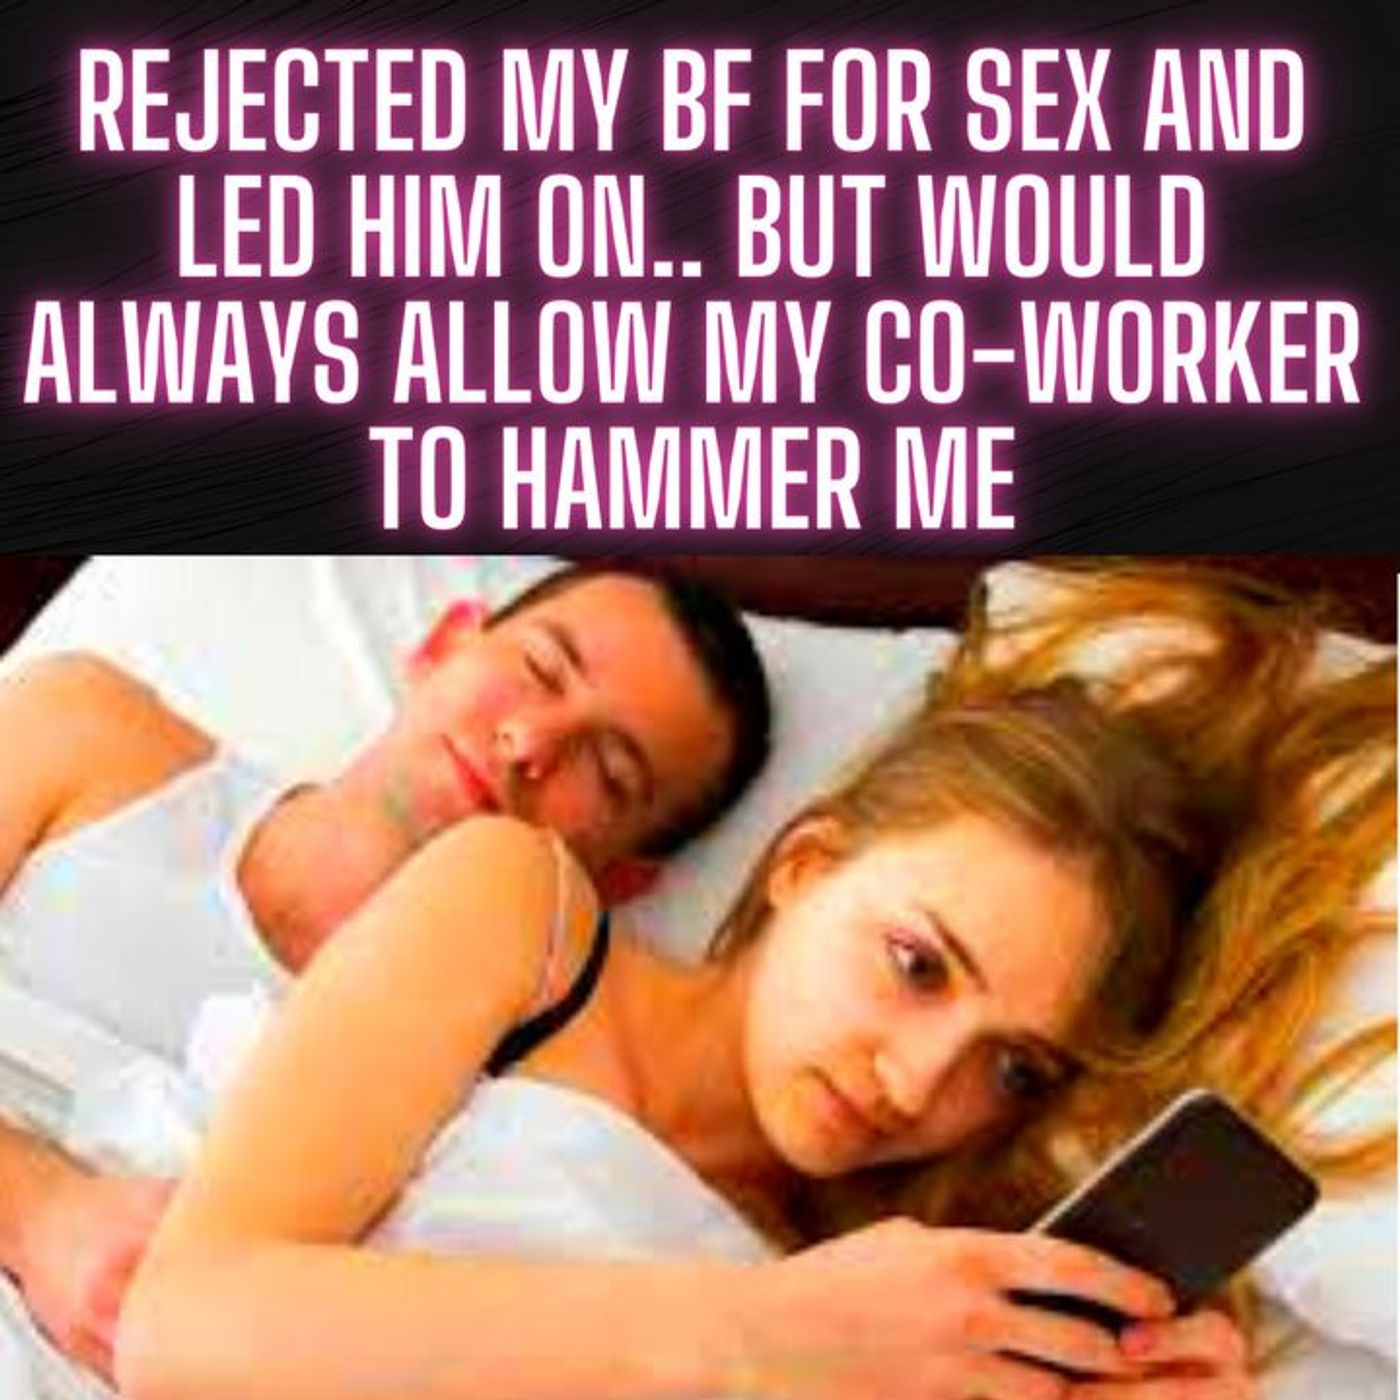 Rejected My Bf For Sex and Led Him On.. But Would ALWAYS Allow my Co-worker To Hammer Me